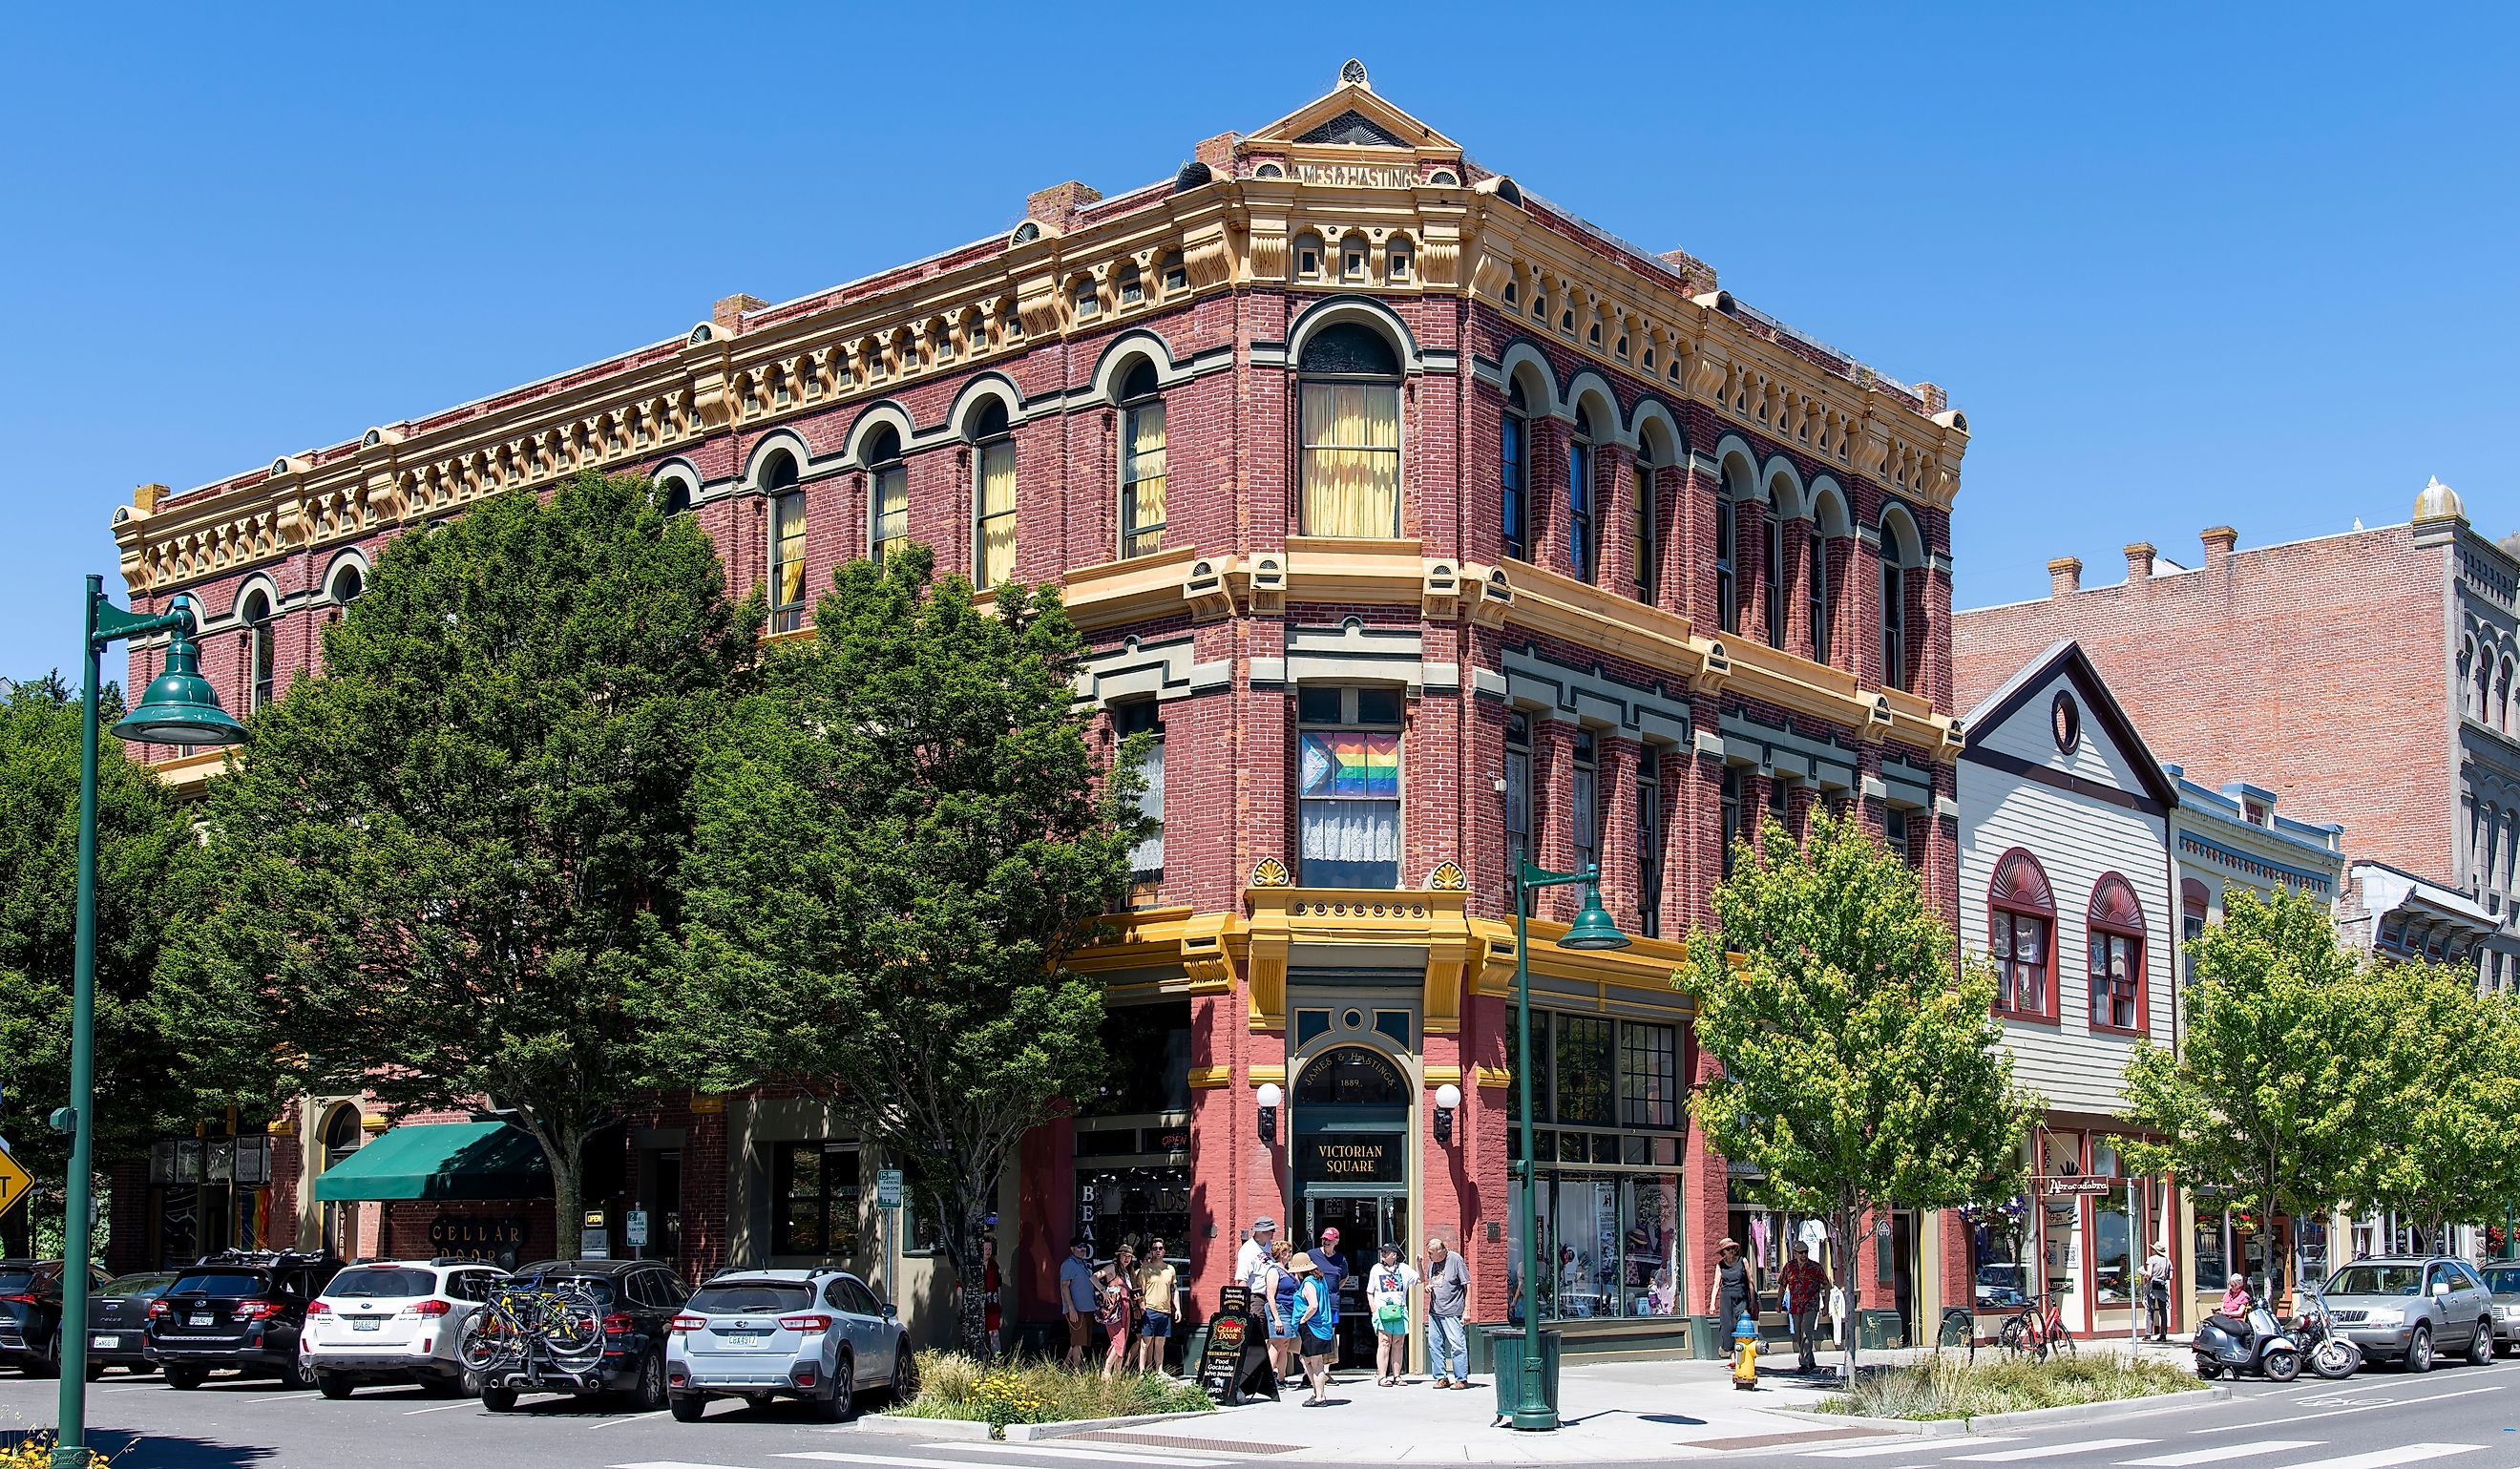 View of downtown Water Street in Port Townsend Historic District lined with well-preserved late 19th-century buildings. Editorial credit: 365 Focus Photography / Shutterstock.com